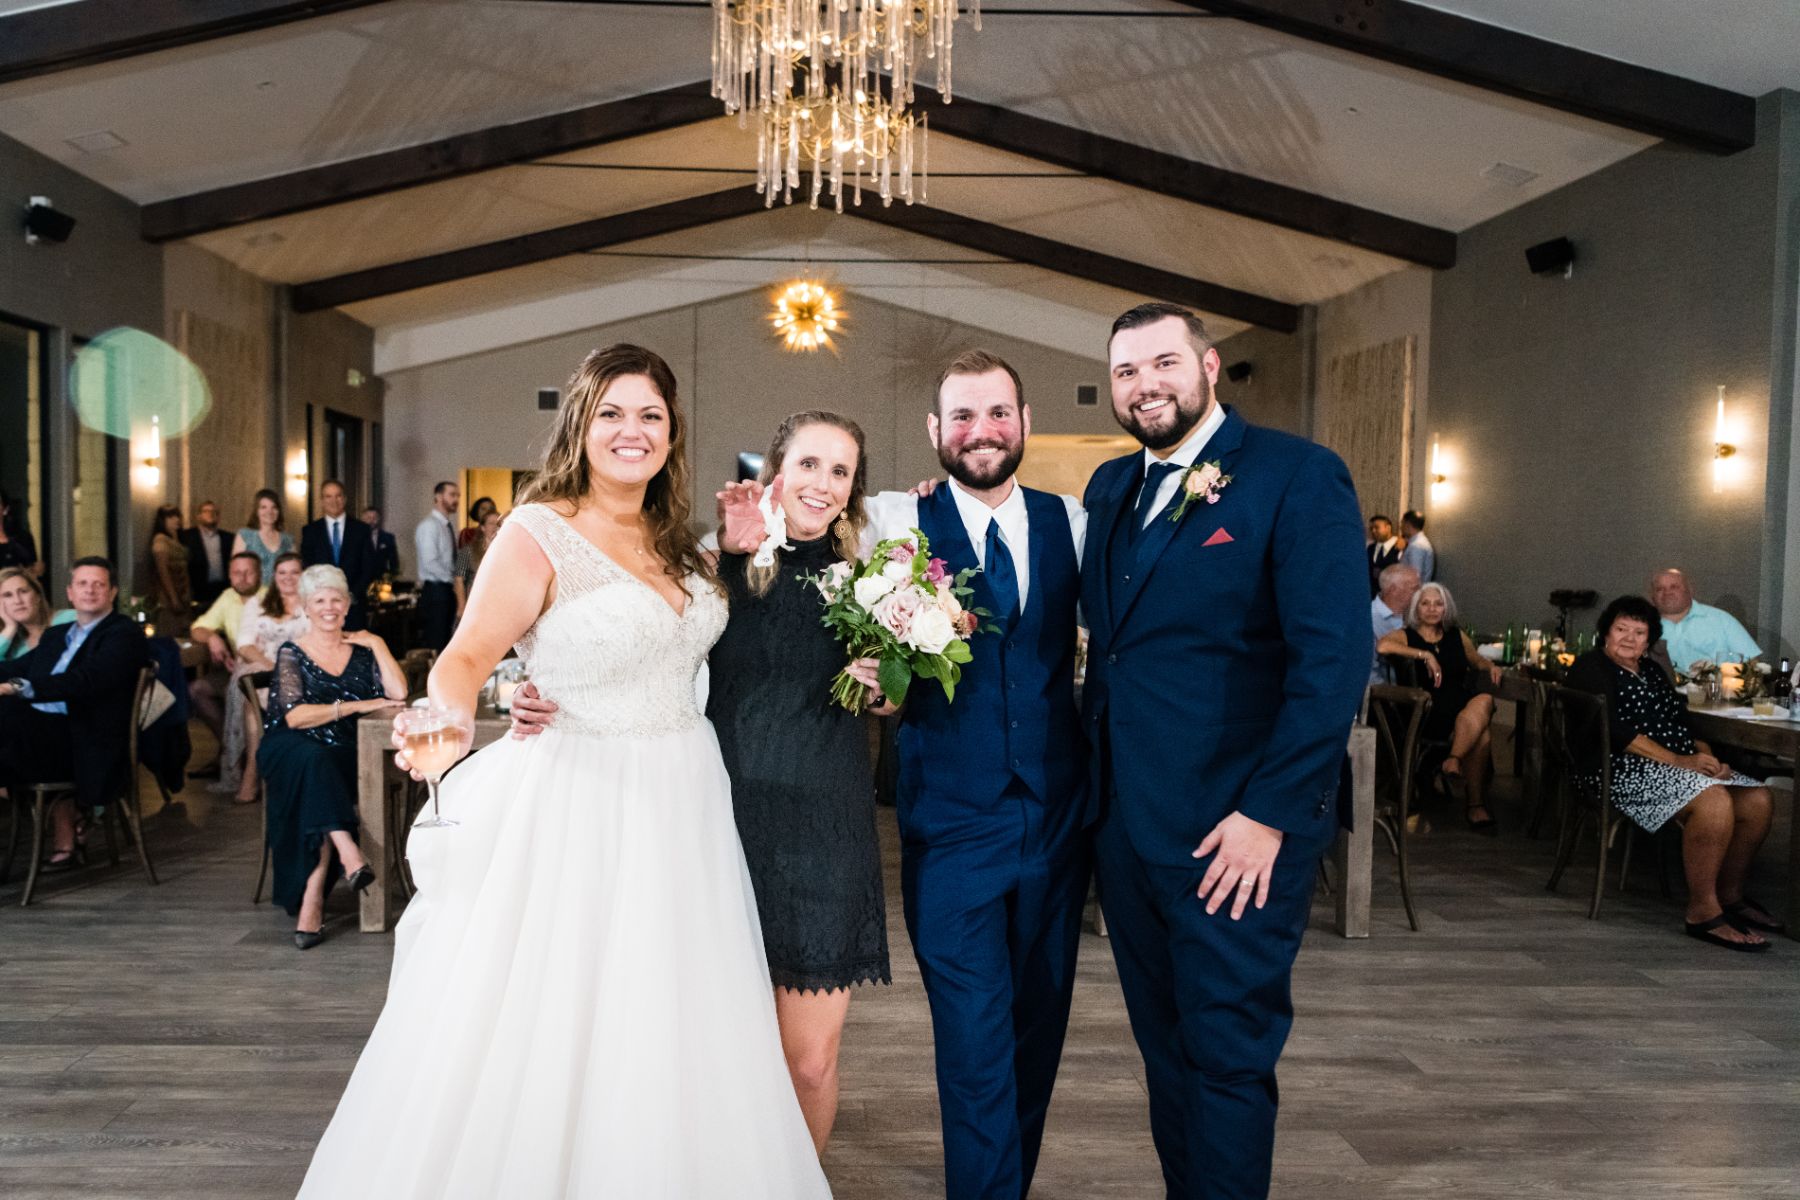 Bride and groom pose with two wedding guests during their wedding reception inside a large reception hall with exposed wood, beams, and chandeliers above at Stonehouse Villa.